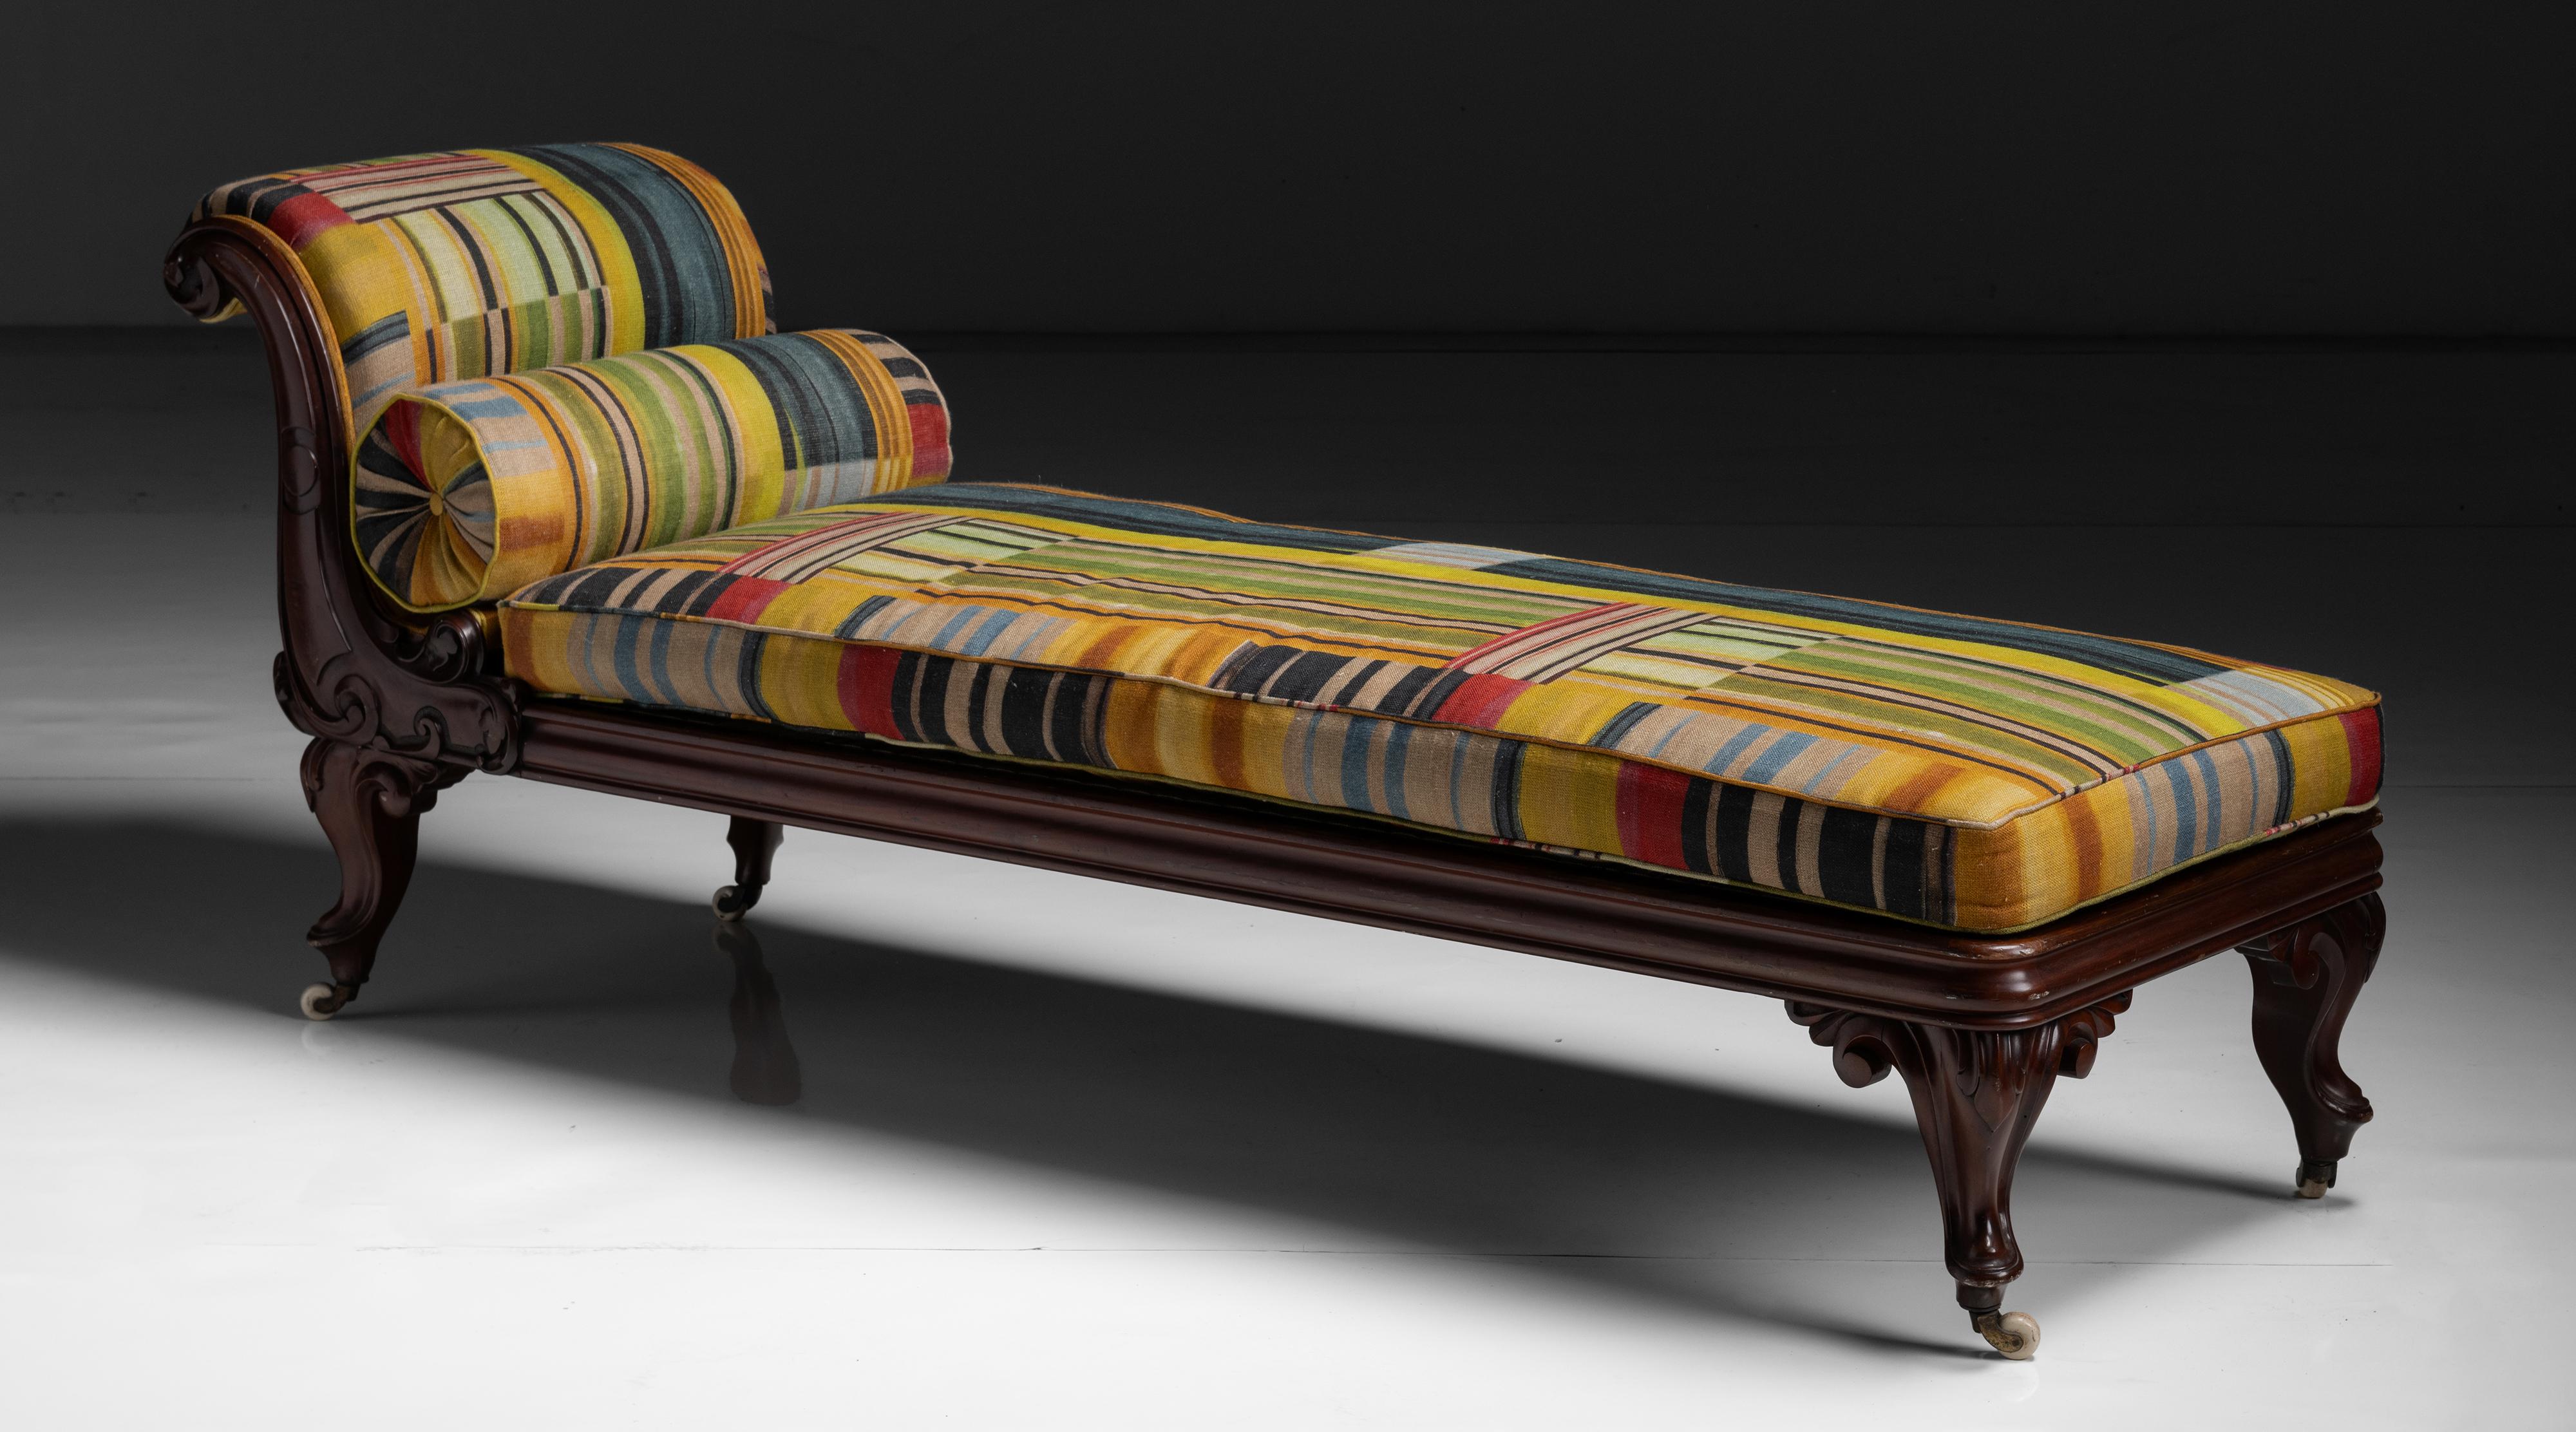 Daybed in Striped Linen by Pierre Frey

England circa 1870

Newly upholstered in 100% linen by Pierre Frey.

24.5”w x 80”d x 29.5”h x 18”seat